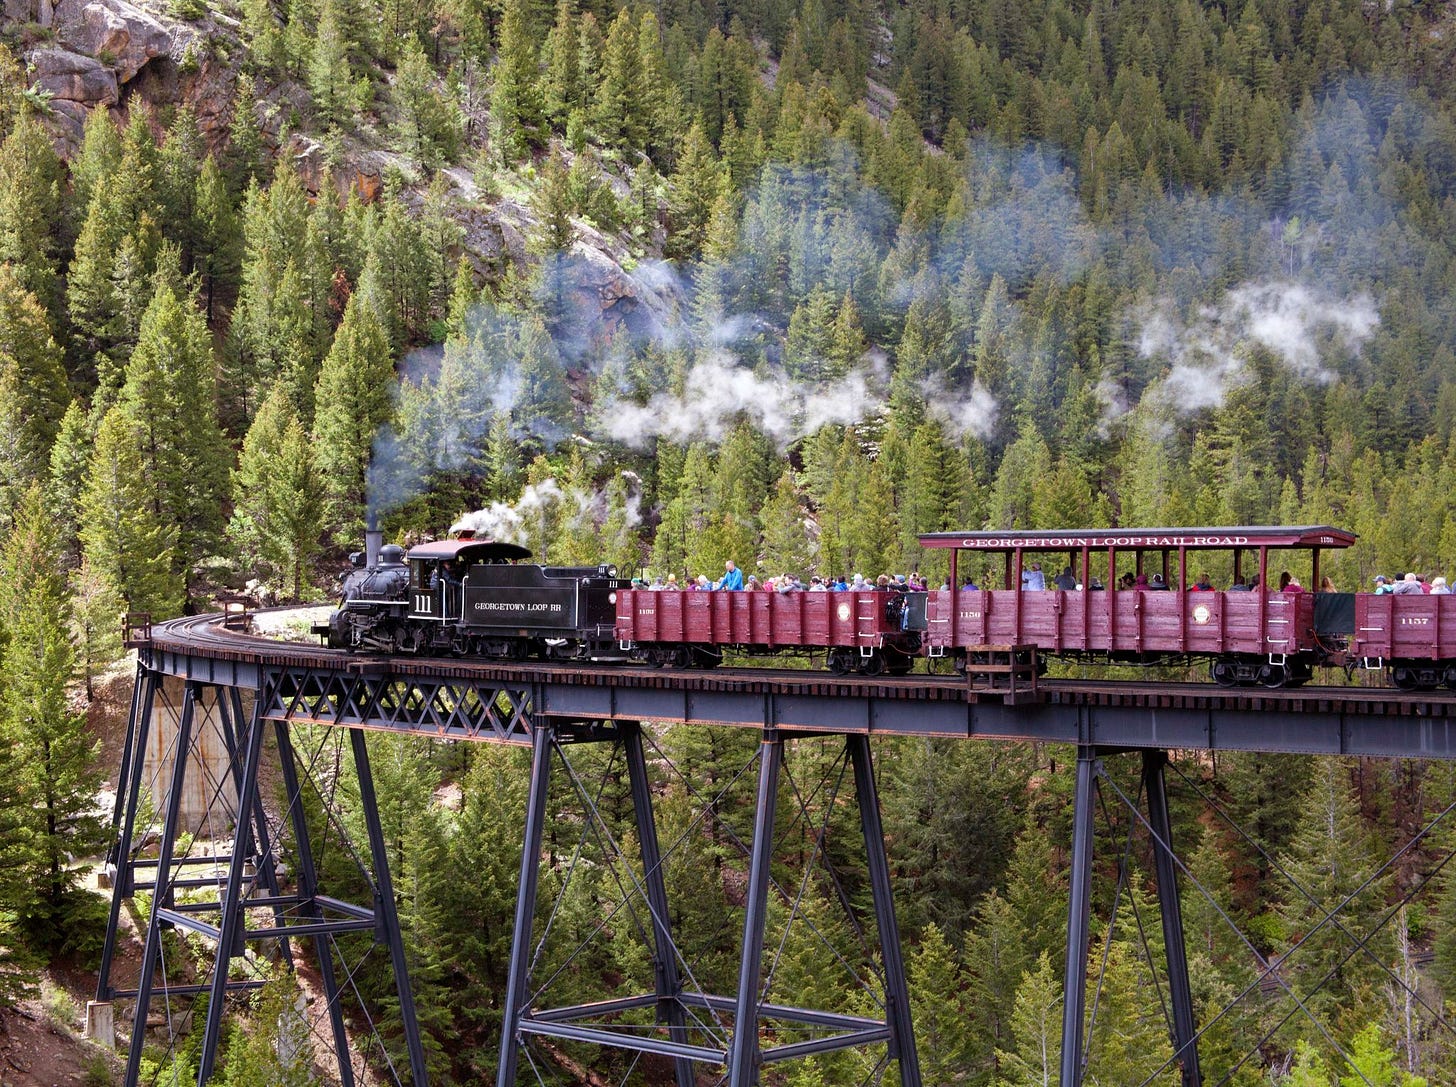 An old fashioned-looking train travels along a mountainous track surrounded by pines.